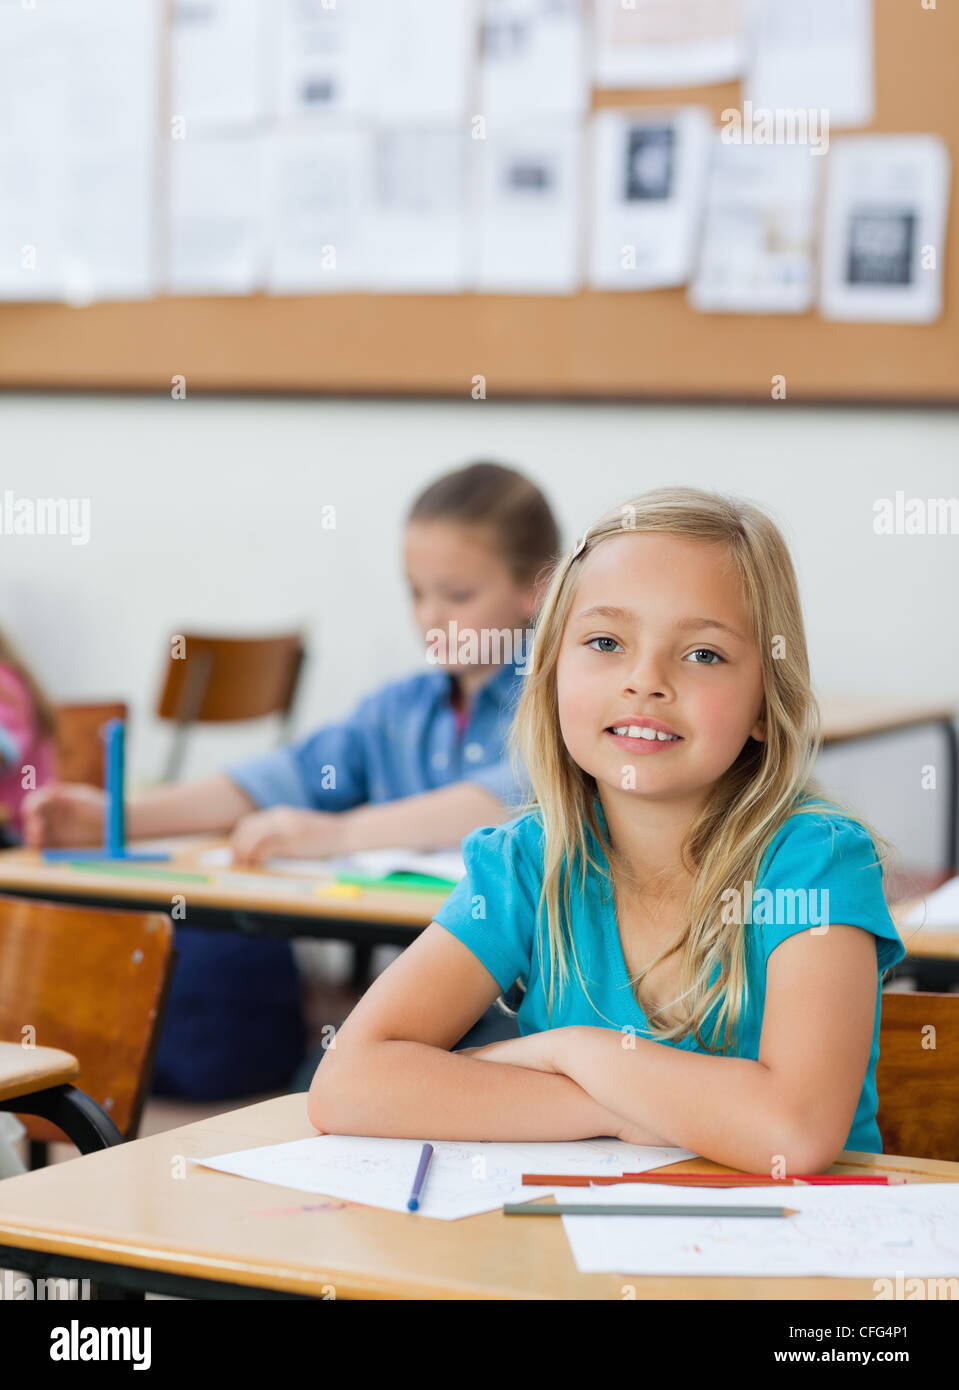 Student sitting at her desk with arms folded Stock Photo